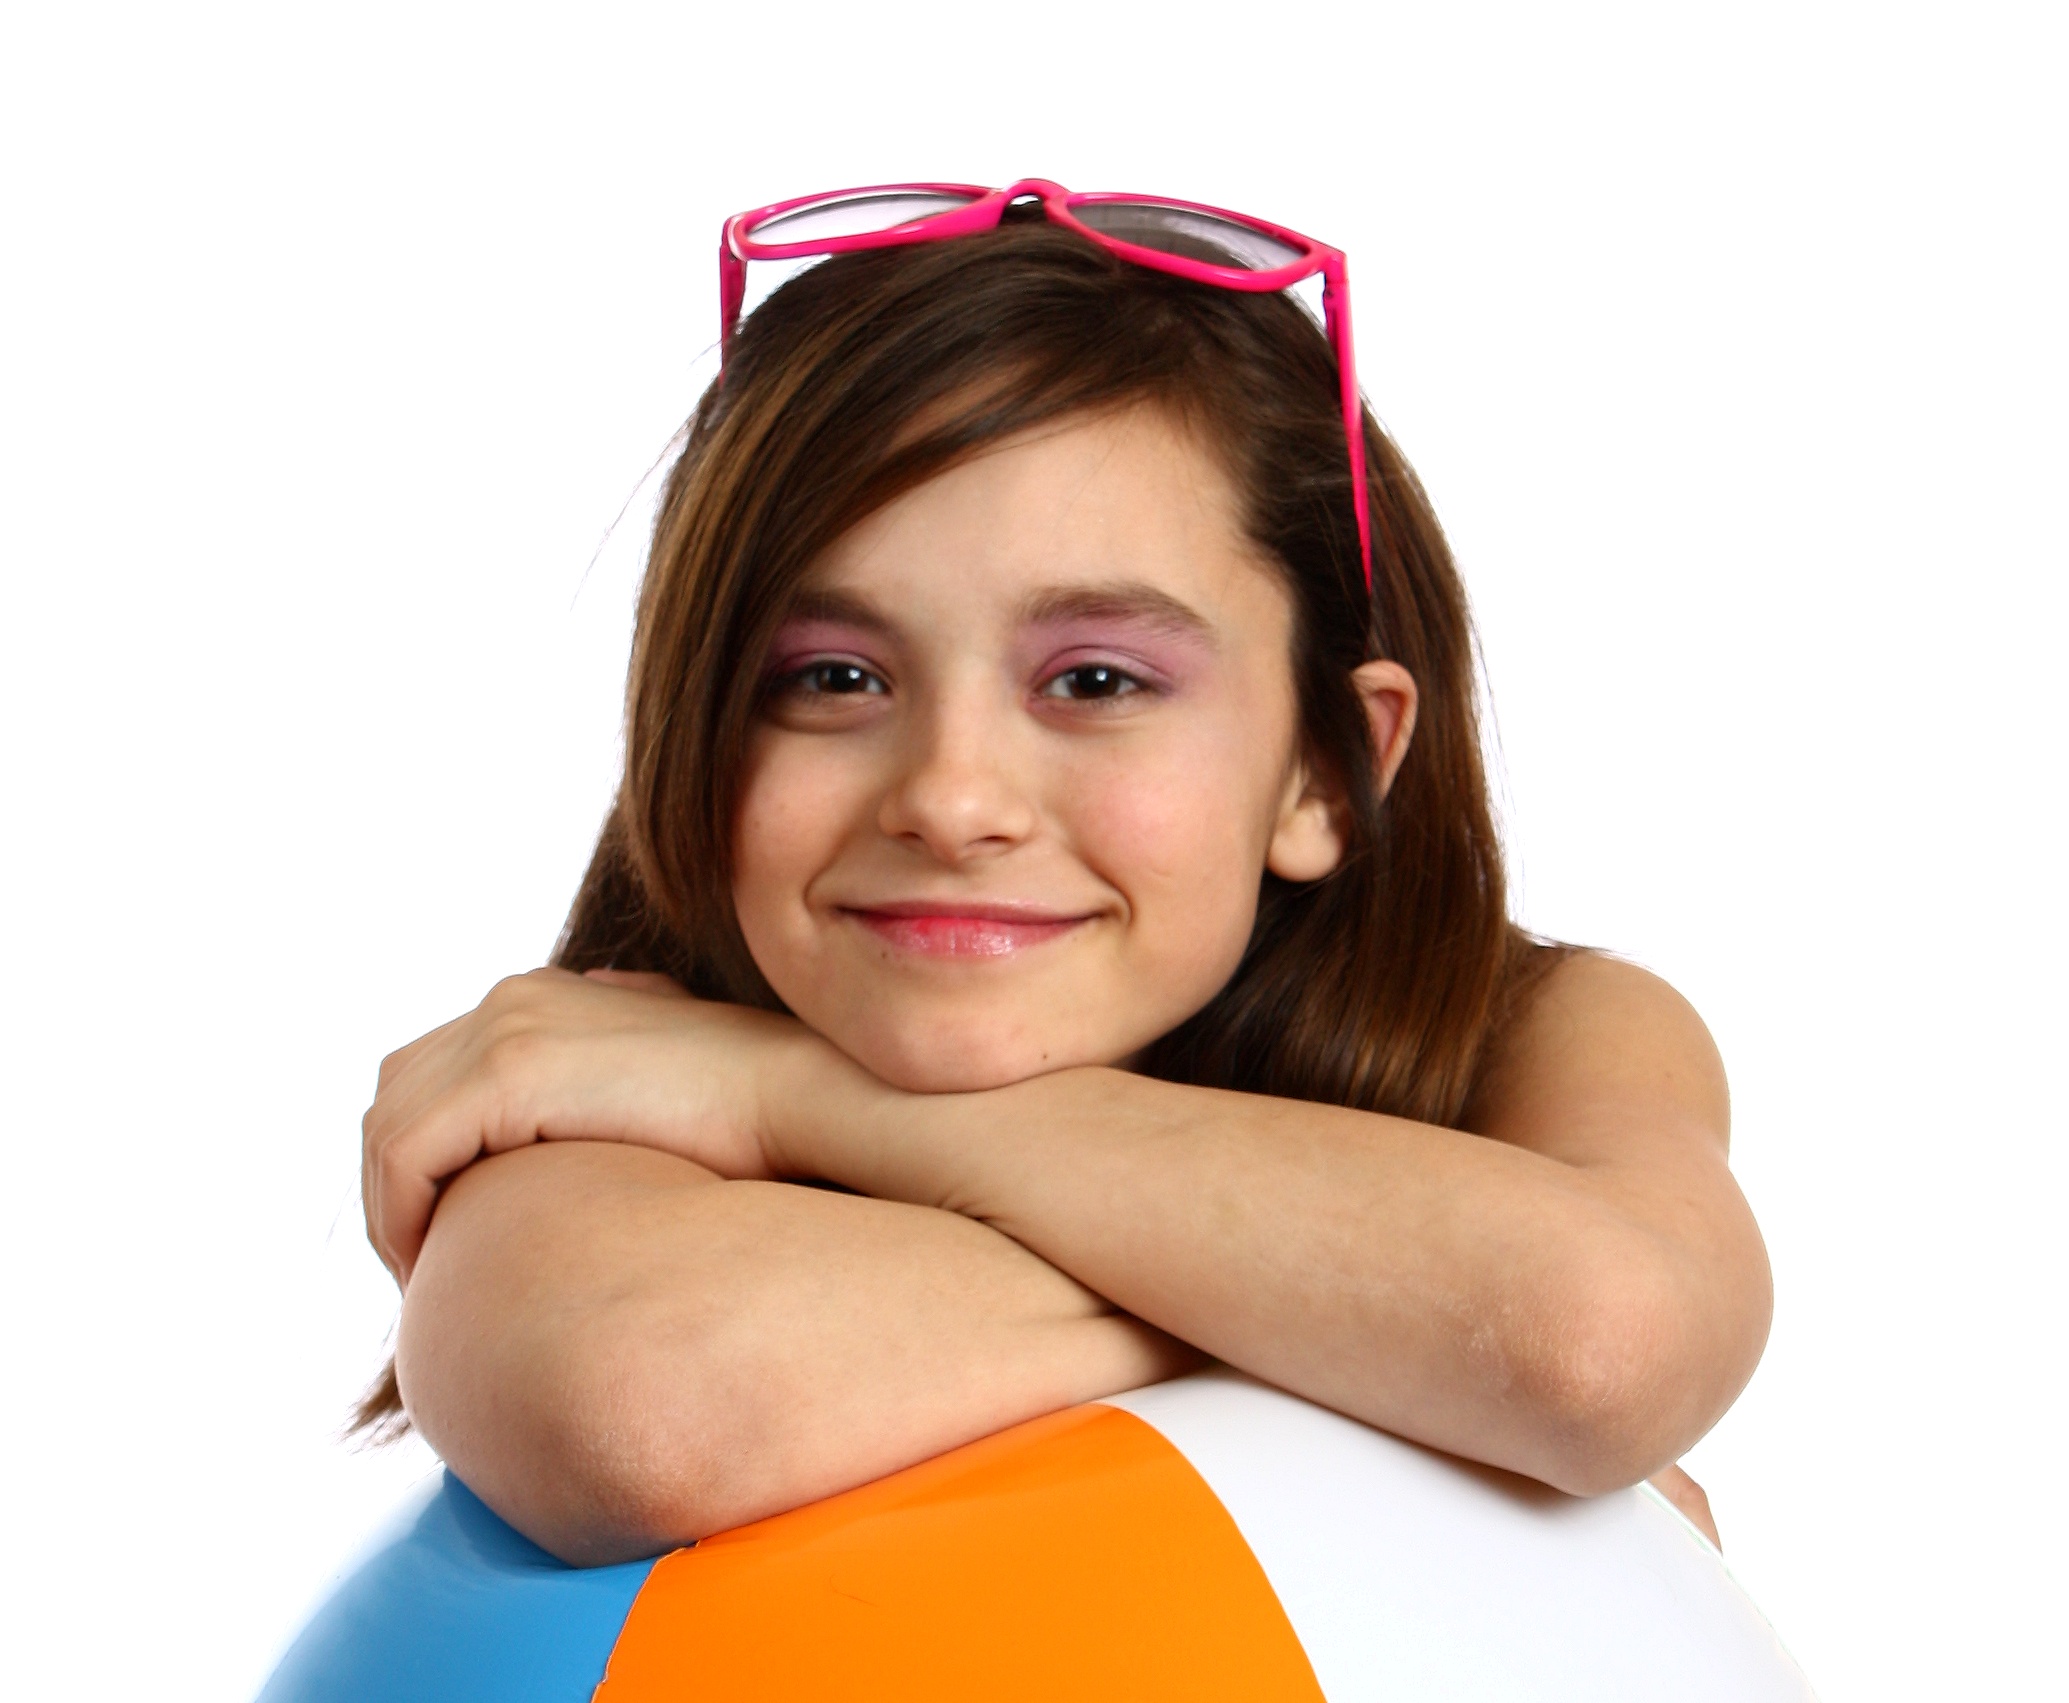 A young girl posing with a beach ball photo